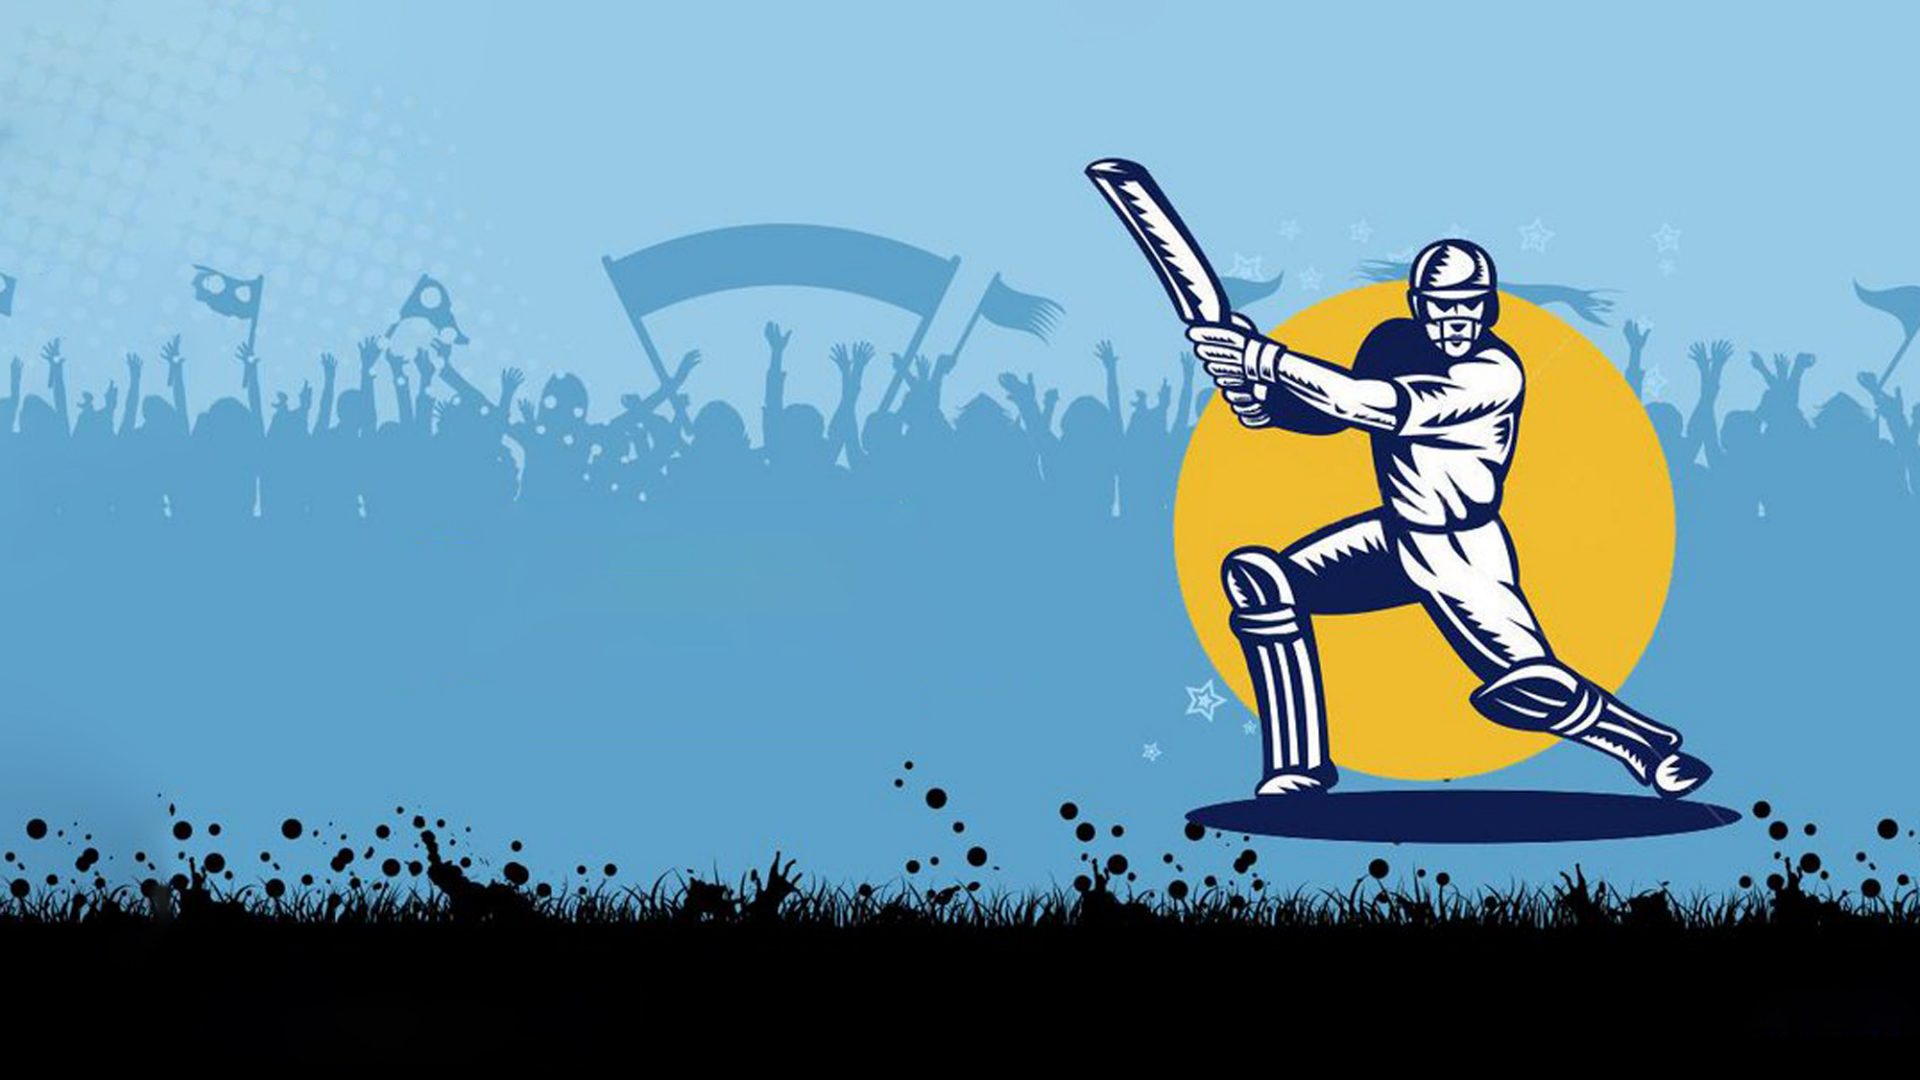 A top Indian auto brand engages its cricket-mad audience with a